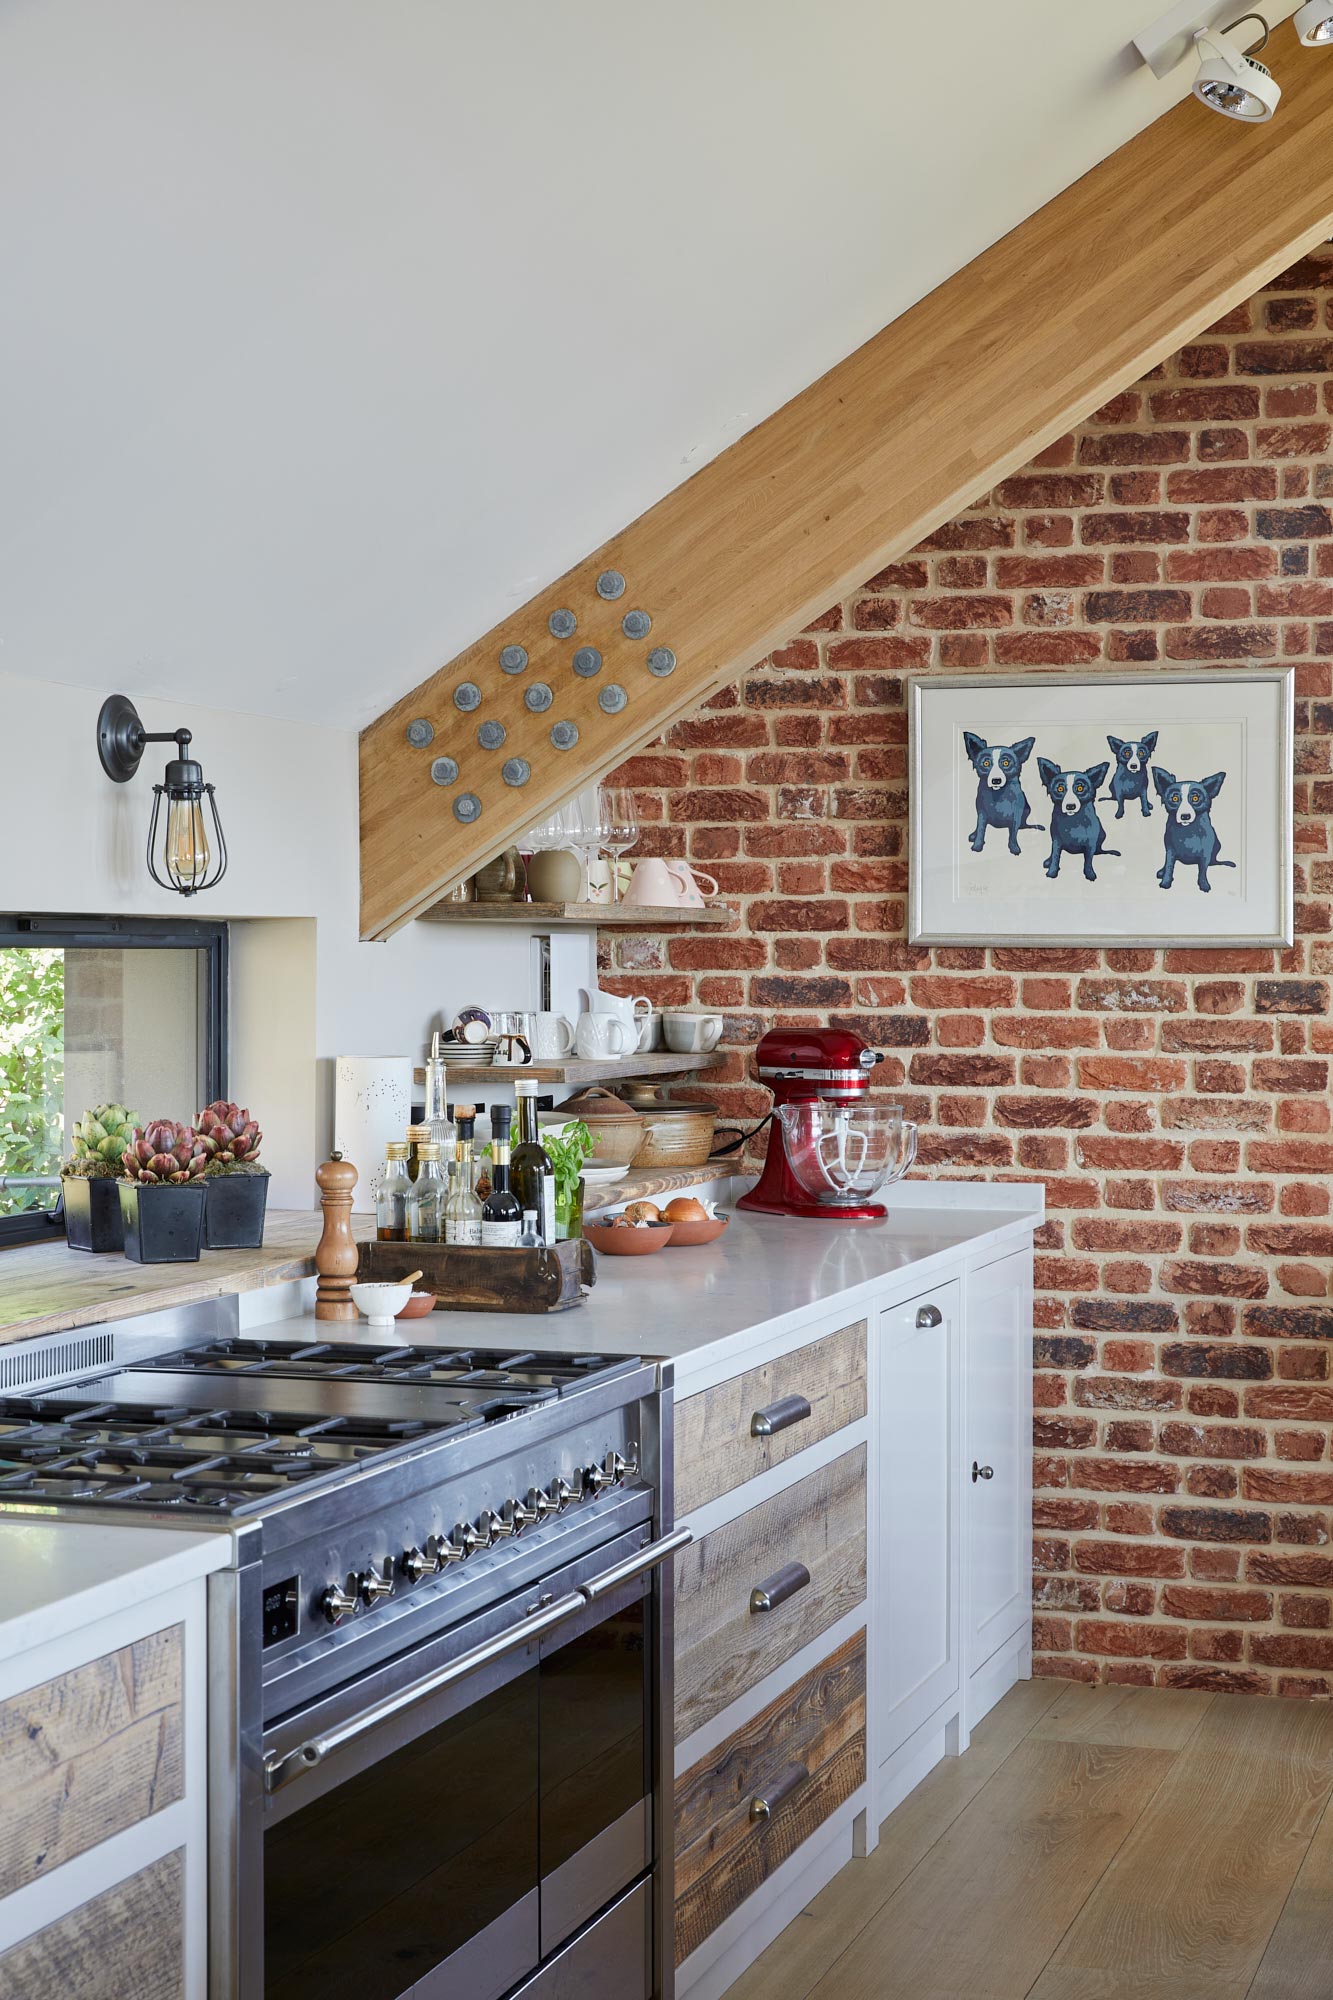 Exposed brick wall in kitchen